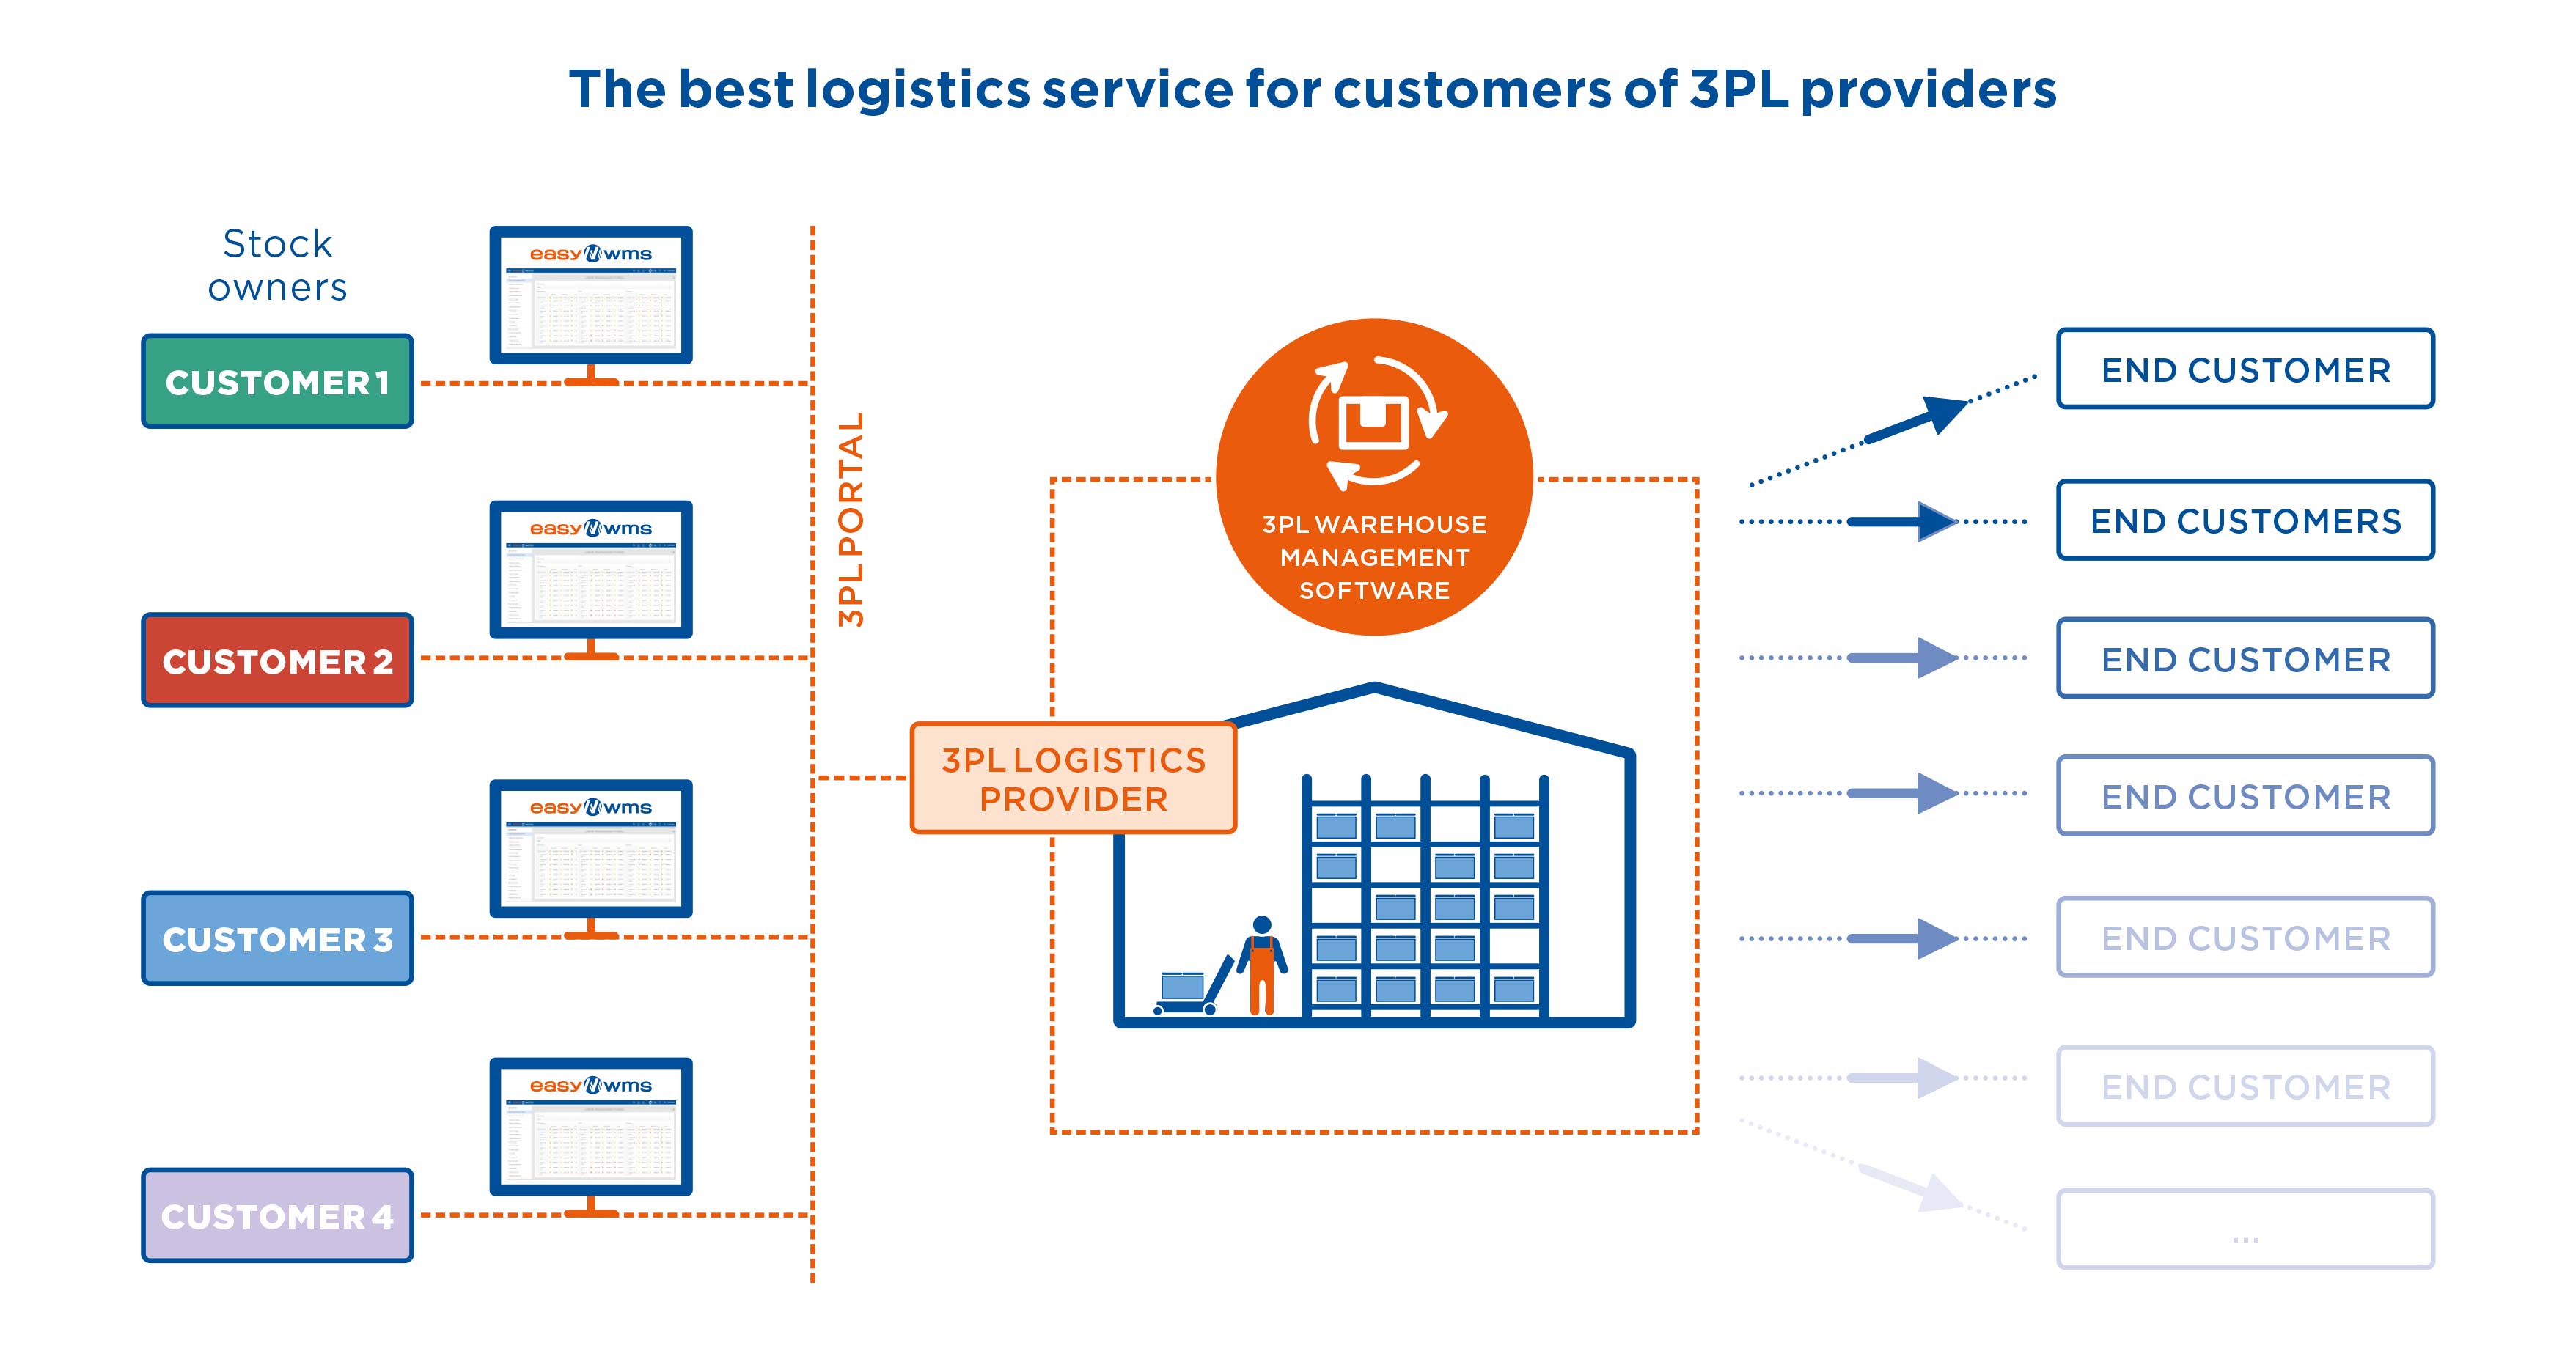 The best logistics service for customers of 3PL providers